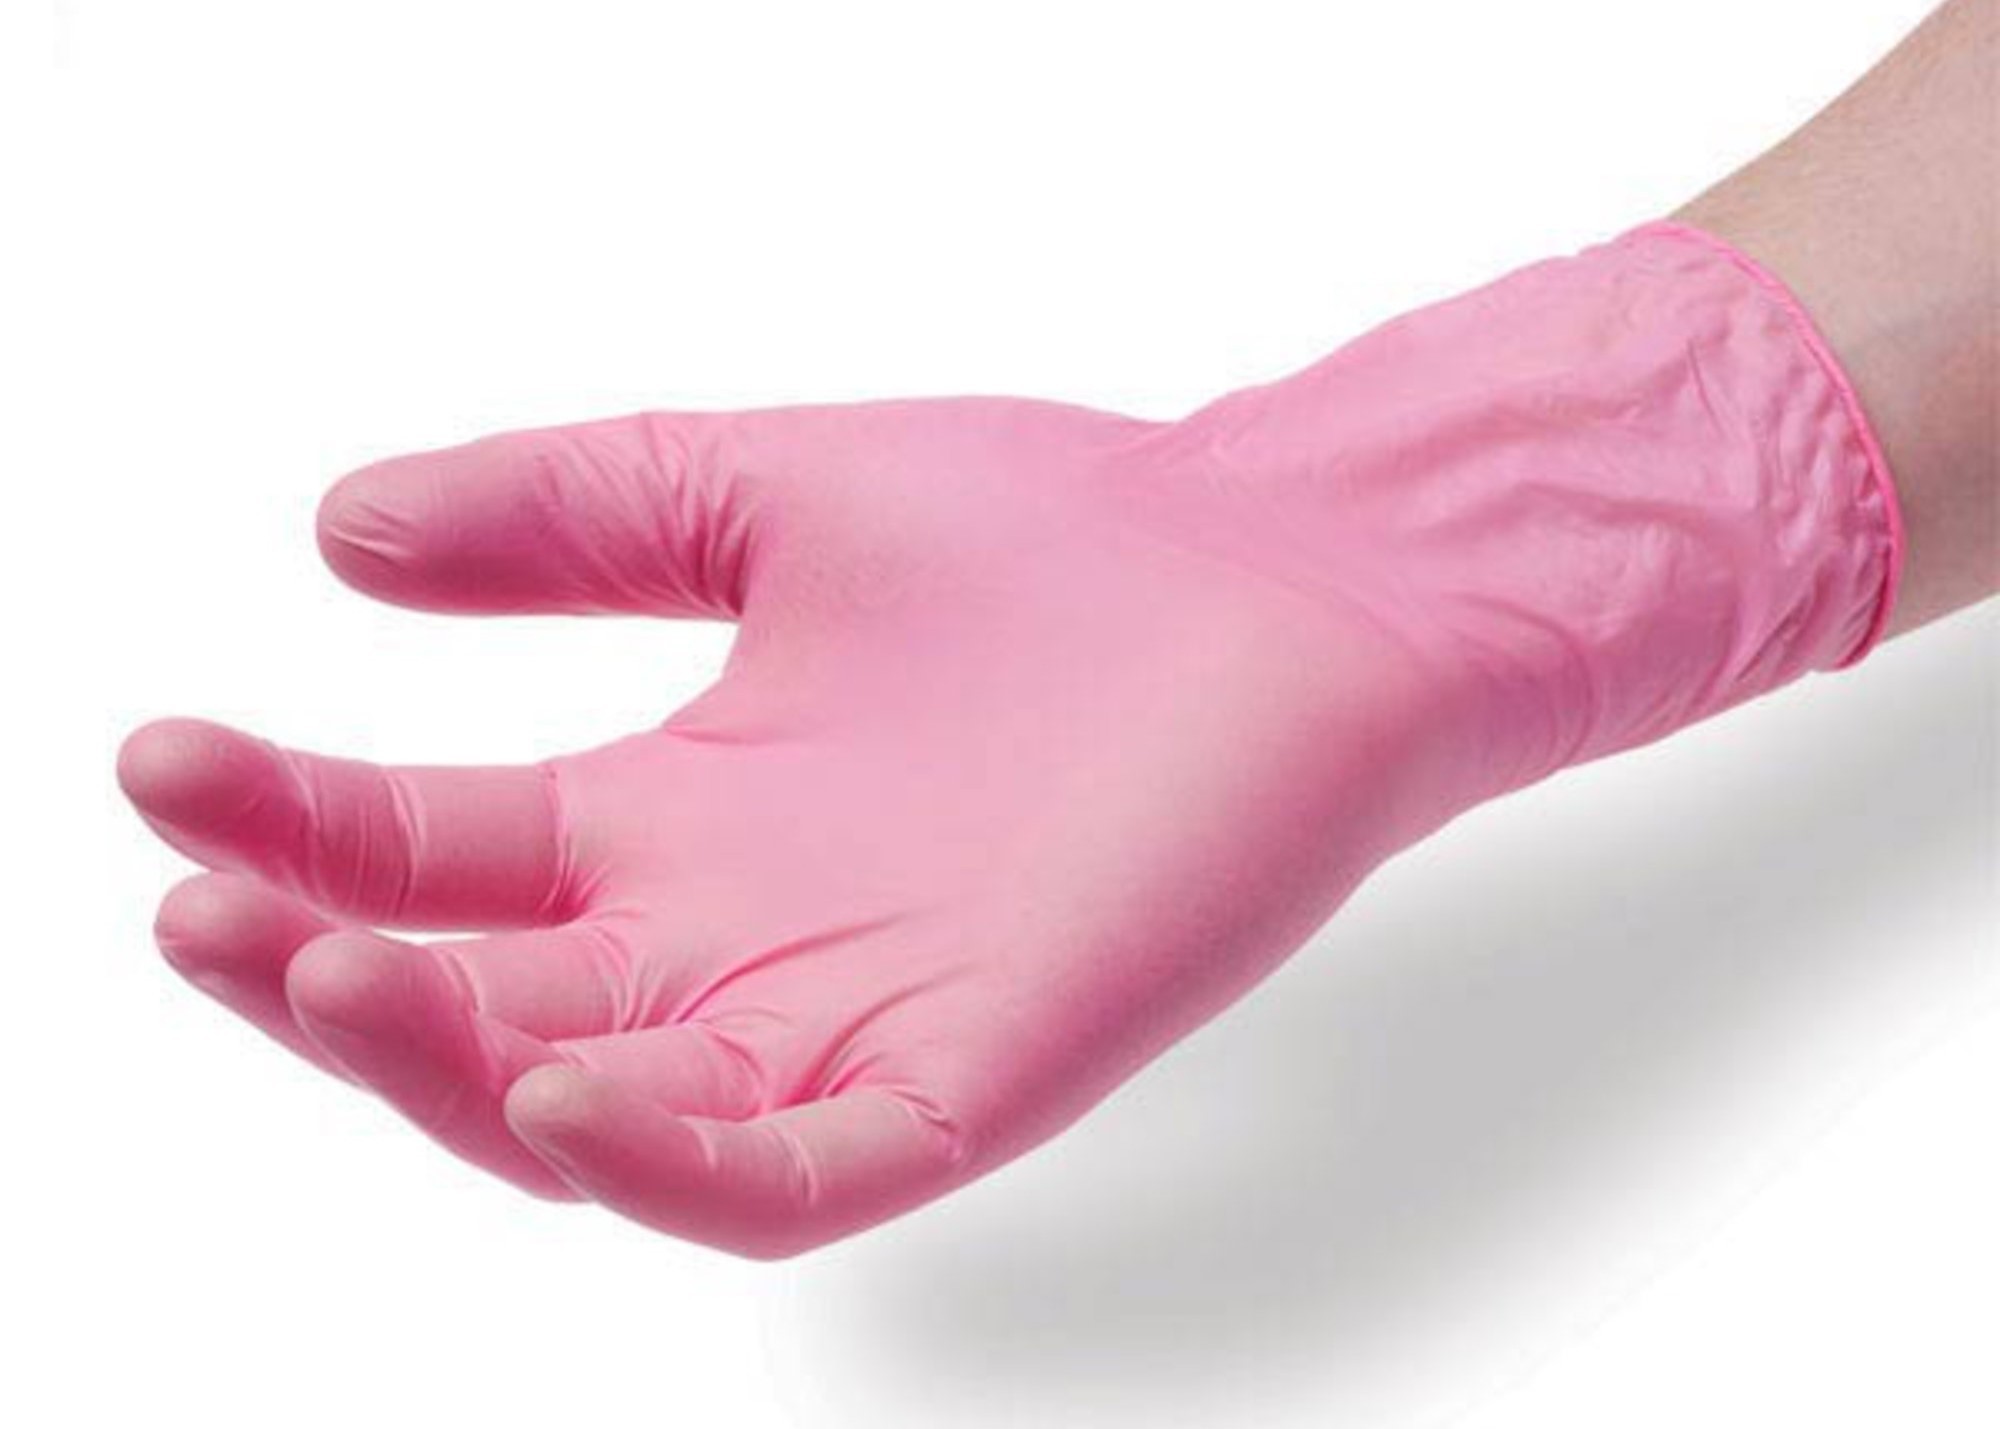  Pink Transparent PVC Disposable Hand Gloves Latex Free Disposable Vinyl Gloves Manufactures